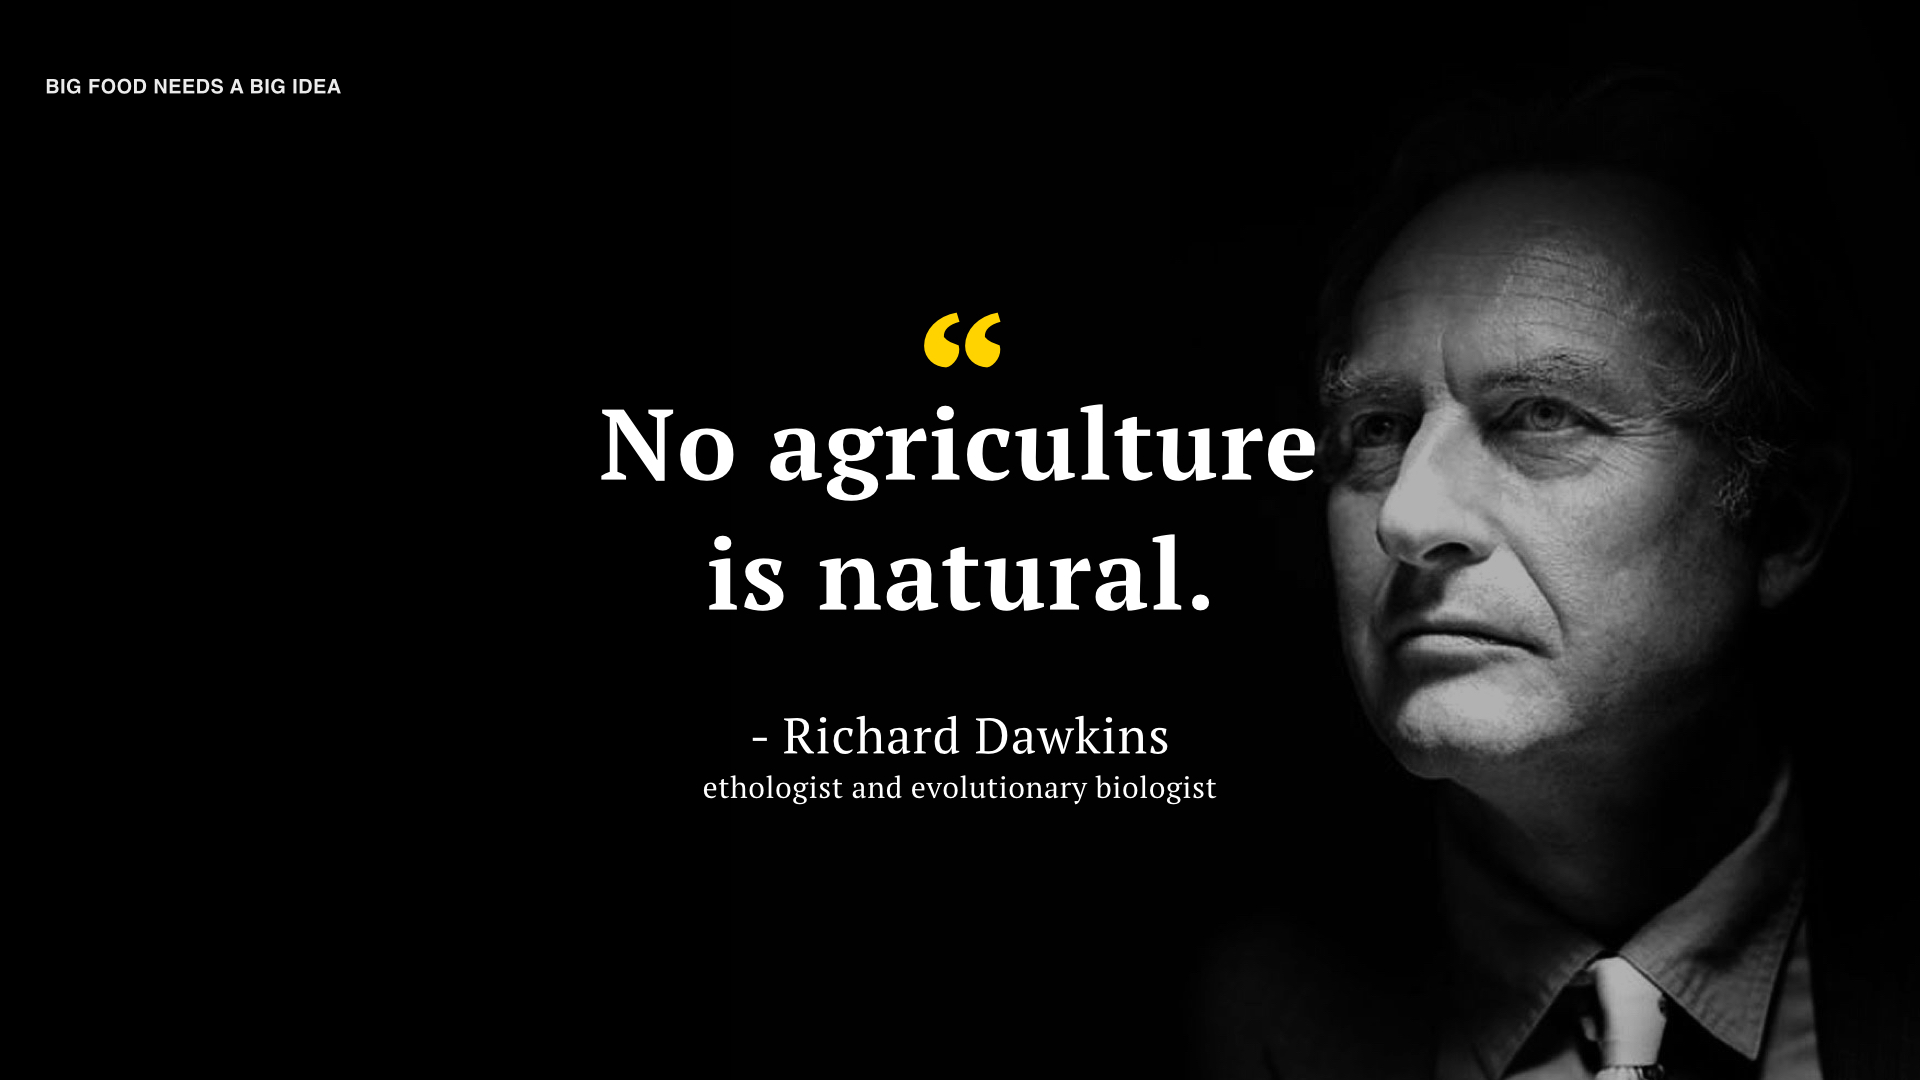  Evolutionary biologist Richard Dawkins said that "No agriculture is natural. Without genetic modifications we wouldn’t be able to recognize our favorite fruits and vegetables. 